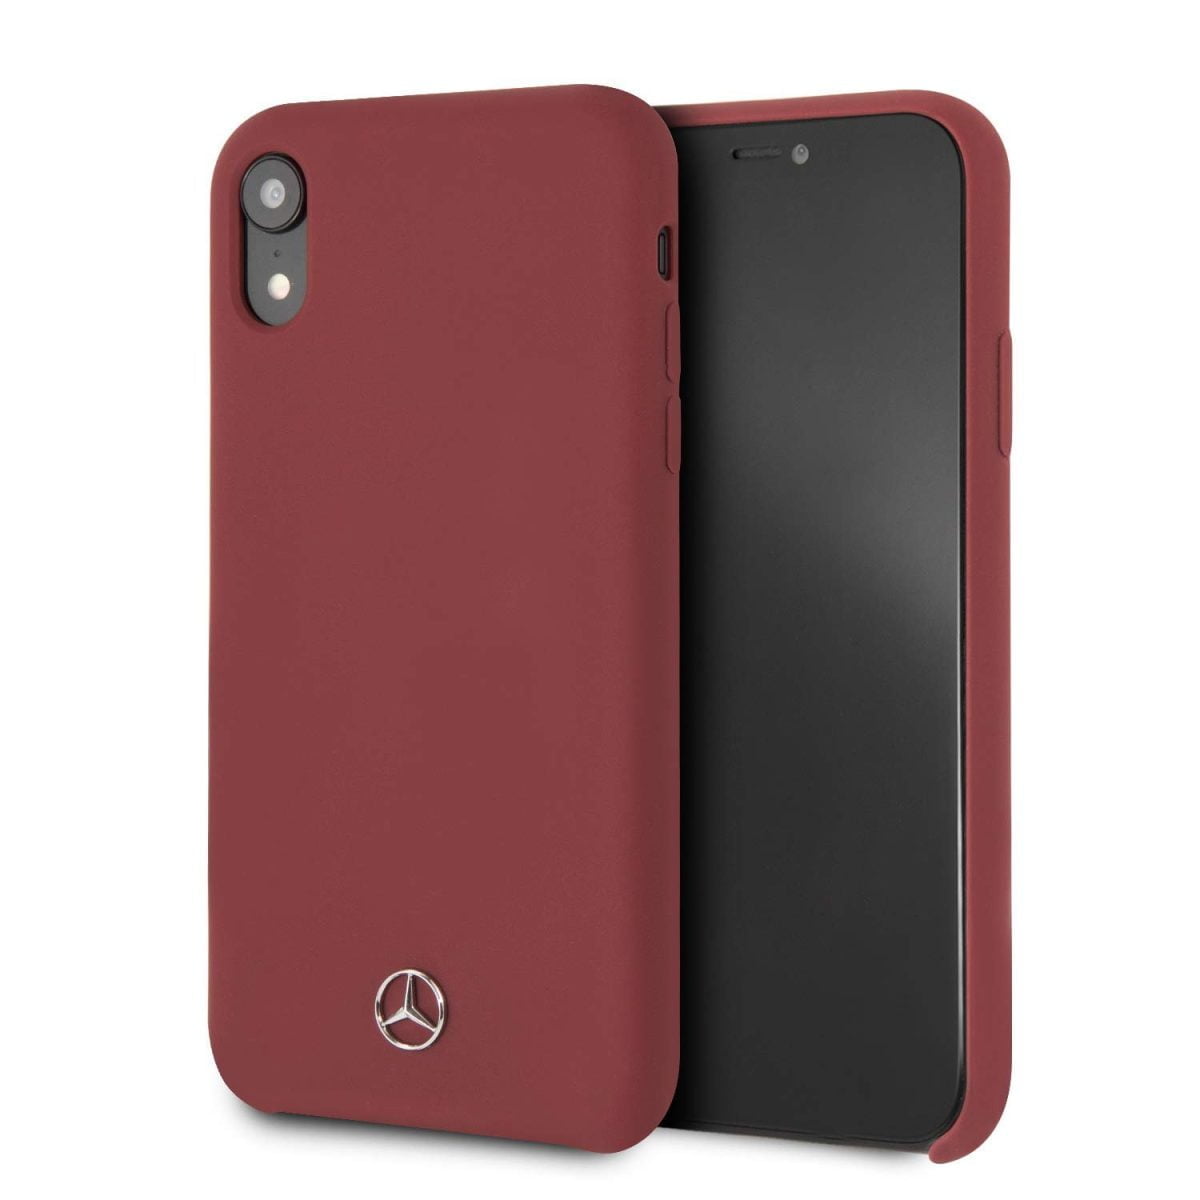 Mercedes Benz Iphone Xr Liquid Silicone Case With Microfiber Lining Red Drop Protection Easily Accessible Ports Officially Licensed 01 &Amp;Lt;H1&Amp;Gt;Iphone Xs Liquid Silicone Case With Microfiber Lining Red (Mercedes-Benz)&Amp;Lt;/H1&Amp;Gt; &Amp;Lt;Span Class=&Amp;Quot;Y2Iqfc&Amp;Quot; Lang=&Amp;Quot;En&Amp;Quot;&Amp;Gt;Mercedes-Benz Pattern Ii Series. The Minimalist And Captivating Aesthetics Of Mercedes-Benz Interior Design Have Been Transferred Silicon. They Guarantee A Unique Look And Safety For Your Phone. - Silicon Case With A Metallic Mercedes-Benz Logo Has A 3D Effect - The Unique Finish Enhances The Look And Quality Of This Case - Designed With Easy Access To Ports And Buttons - Case Compatible With Wireless Chargers Collection: Pattern Line Twister Type: Hardcase Material:silicon Red  Compatibility: Iphone X / Xs Product Manufactured Under License From Mercedes-Benz.&Amp;Lt;/Span&Amp;Gt; Iphone Silicon Cases Iphone Xs Liquid Silicone Case With Microfiber Lining Red (Mercedes-Benz)